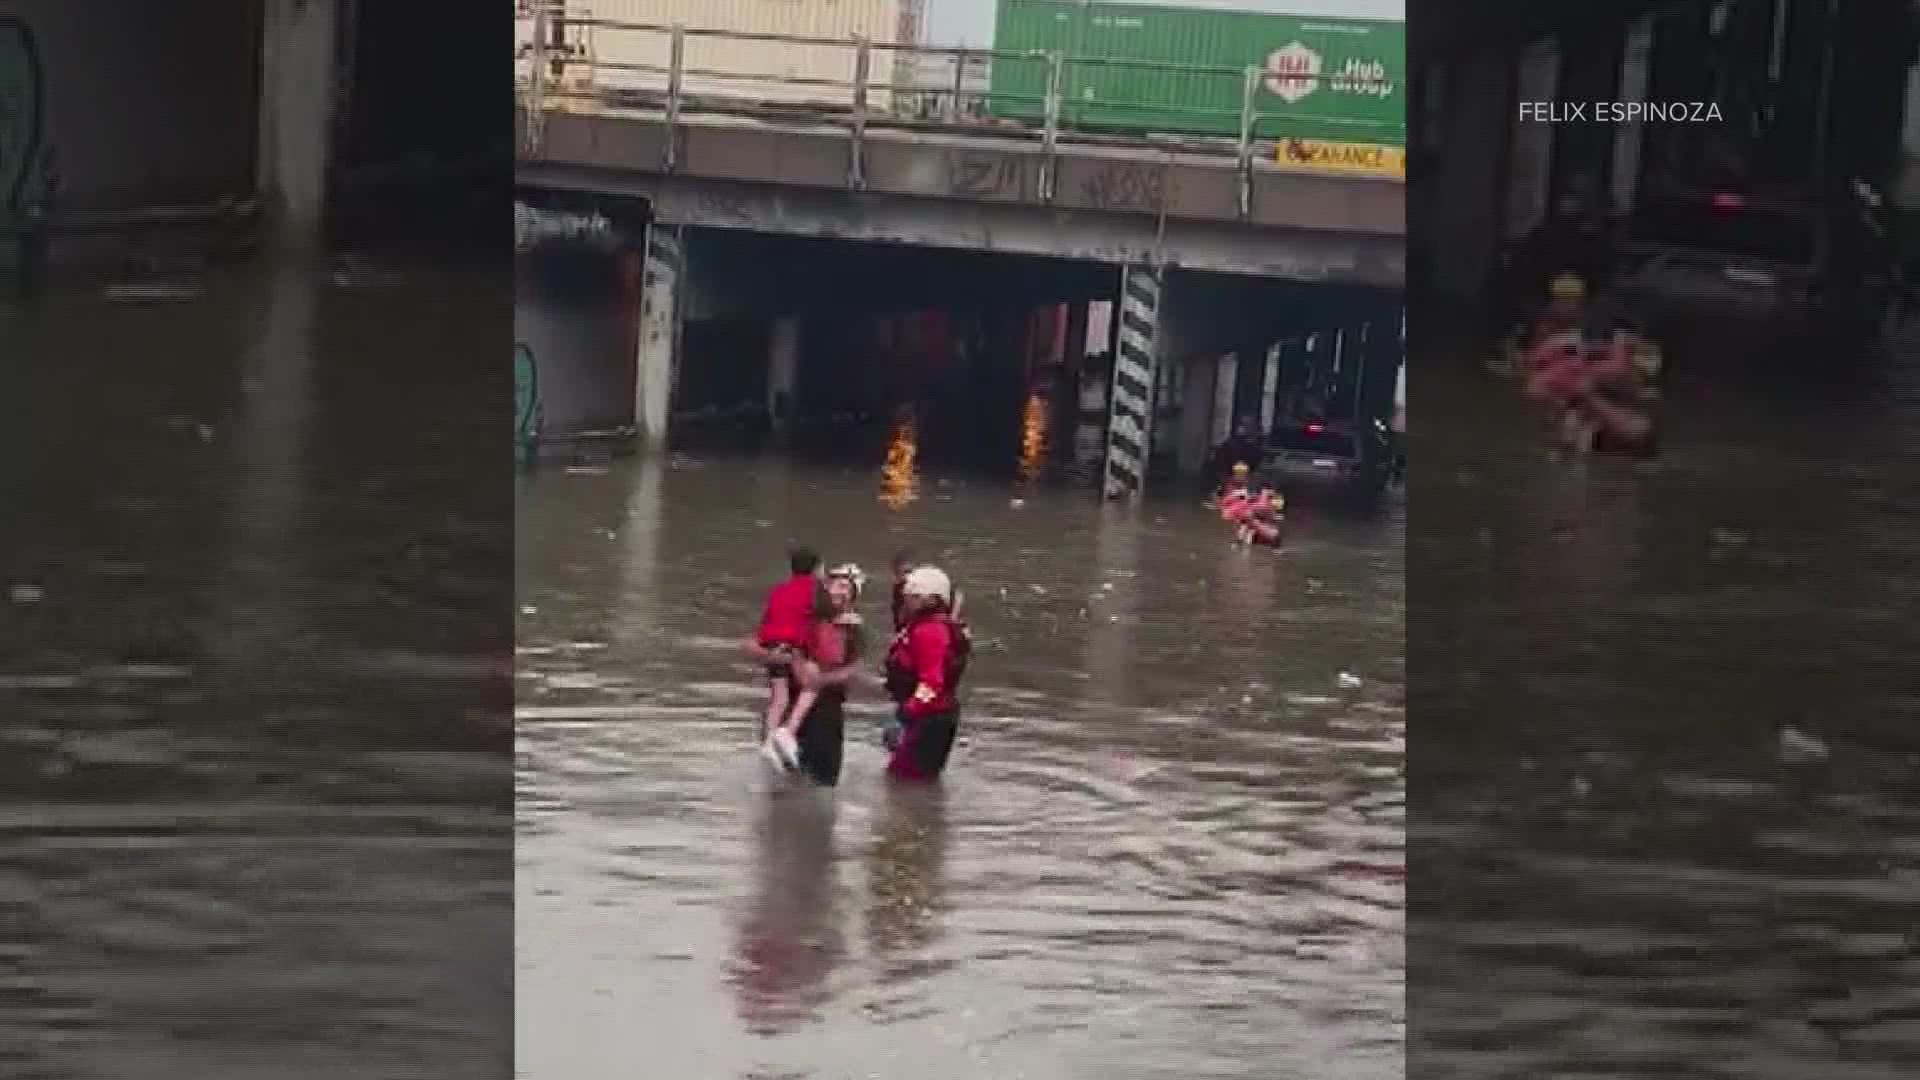 Denver Fire Department crews rescued 11 people in the area of I-70 and York Street and eight others in the area of 38th and Blake during flash flooding Sunday.